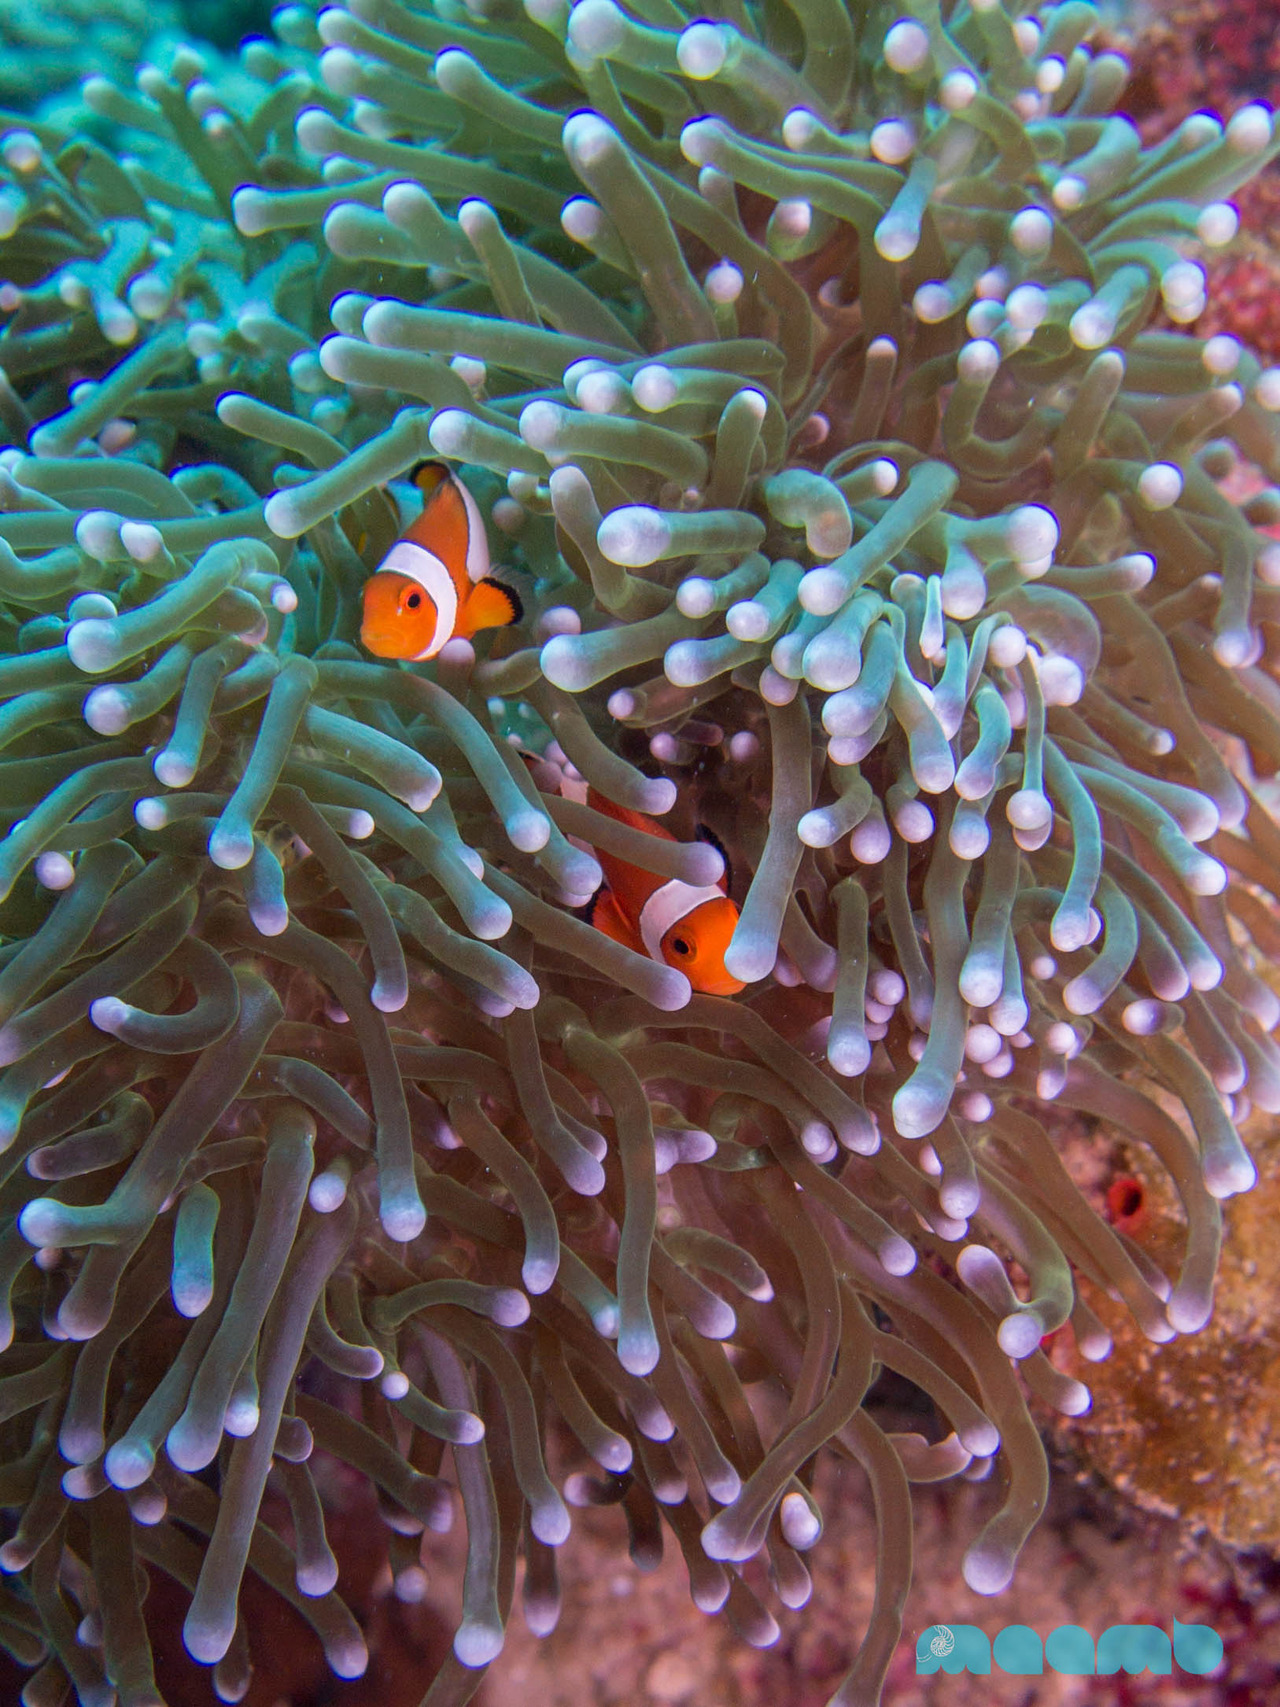 Peek-a-boo | False Clownfish (Amphiprion ocellaris) by Samantha Craven
That’s right. Nemo’s a fake clownfish. And his Papa would actually be his Mama. But you guys probably knew that already!
EDIT: Eduardo makes a good point. *replace Mama with...